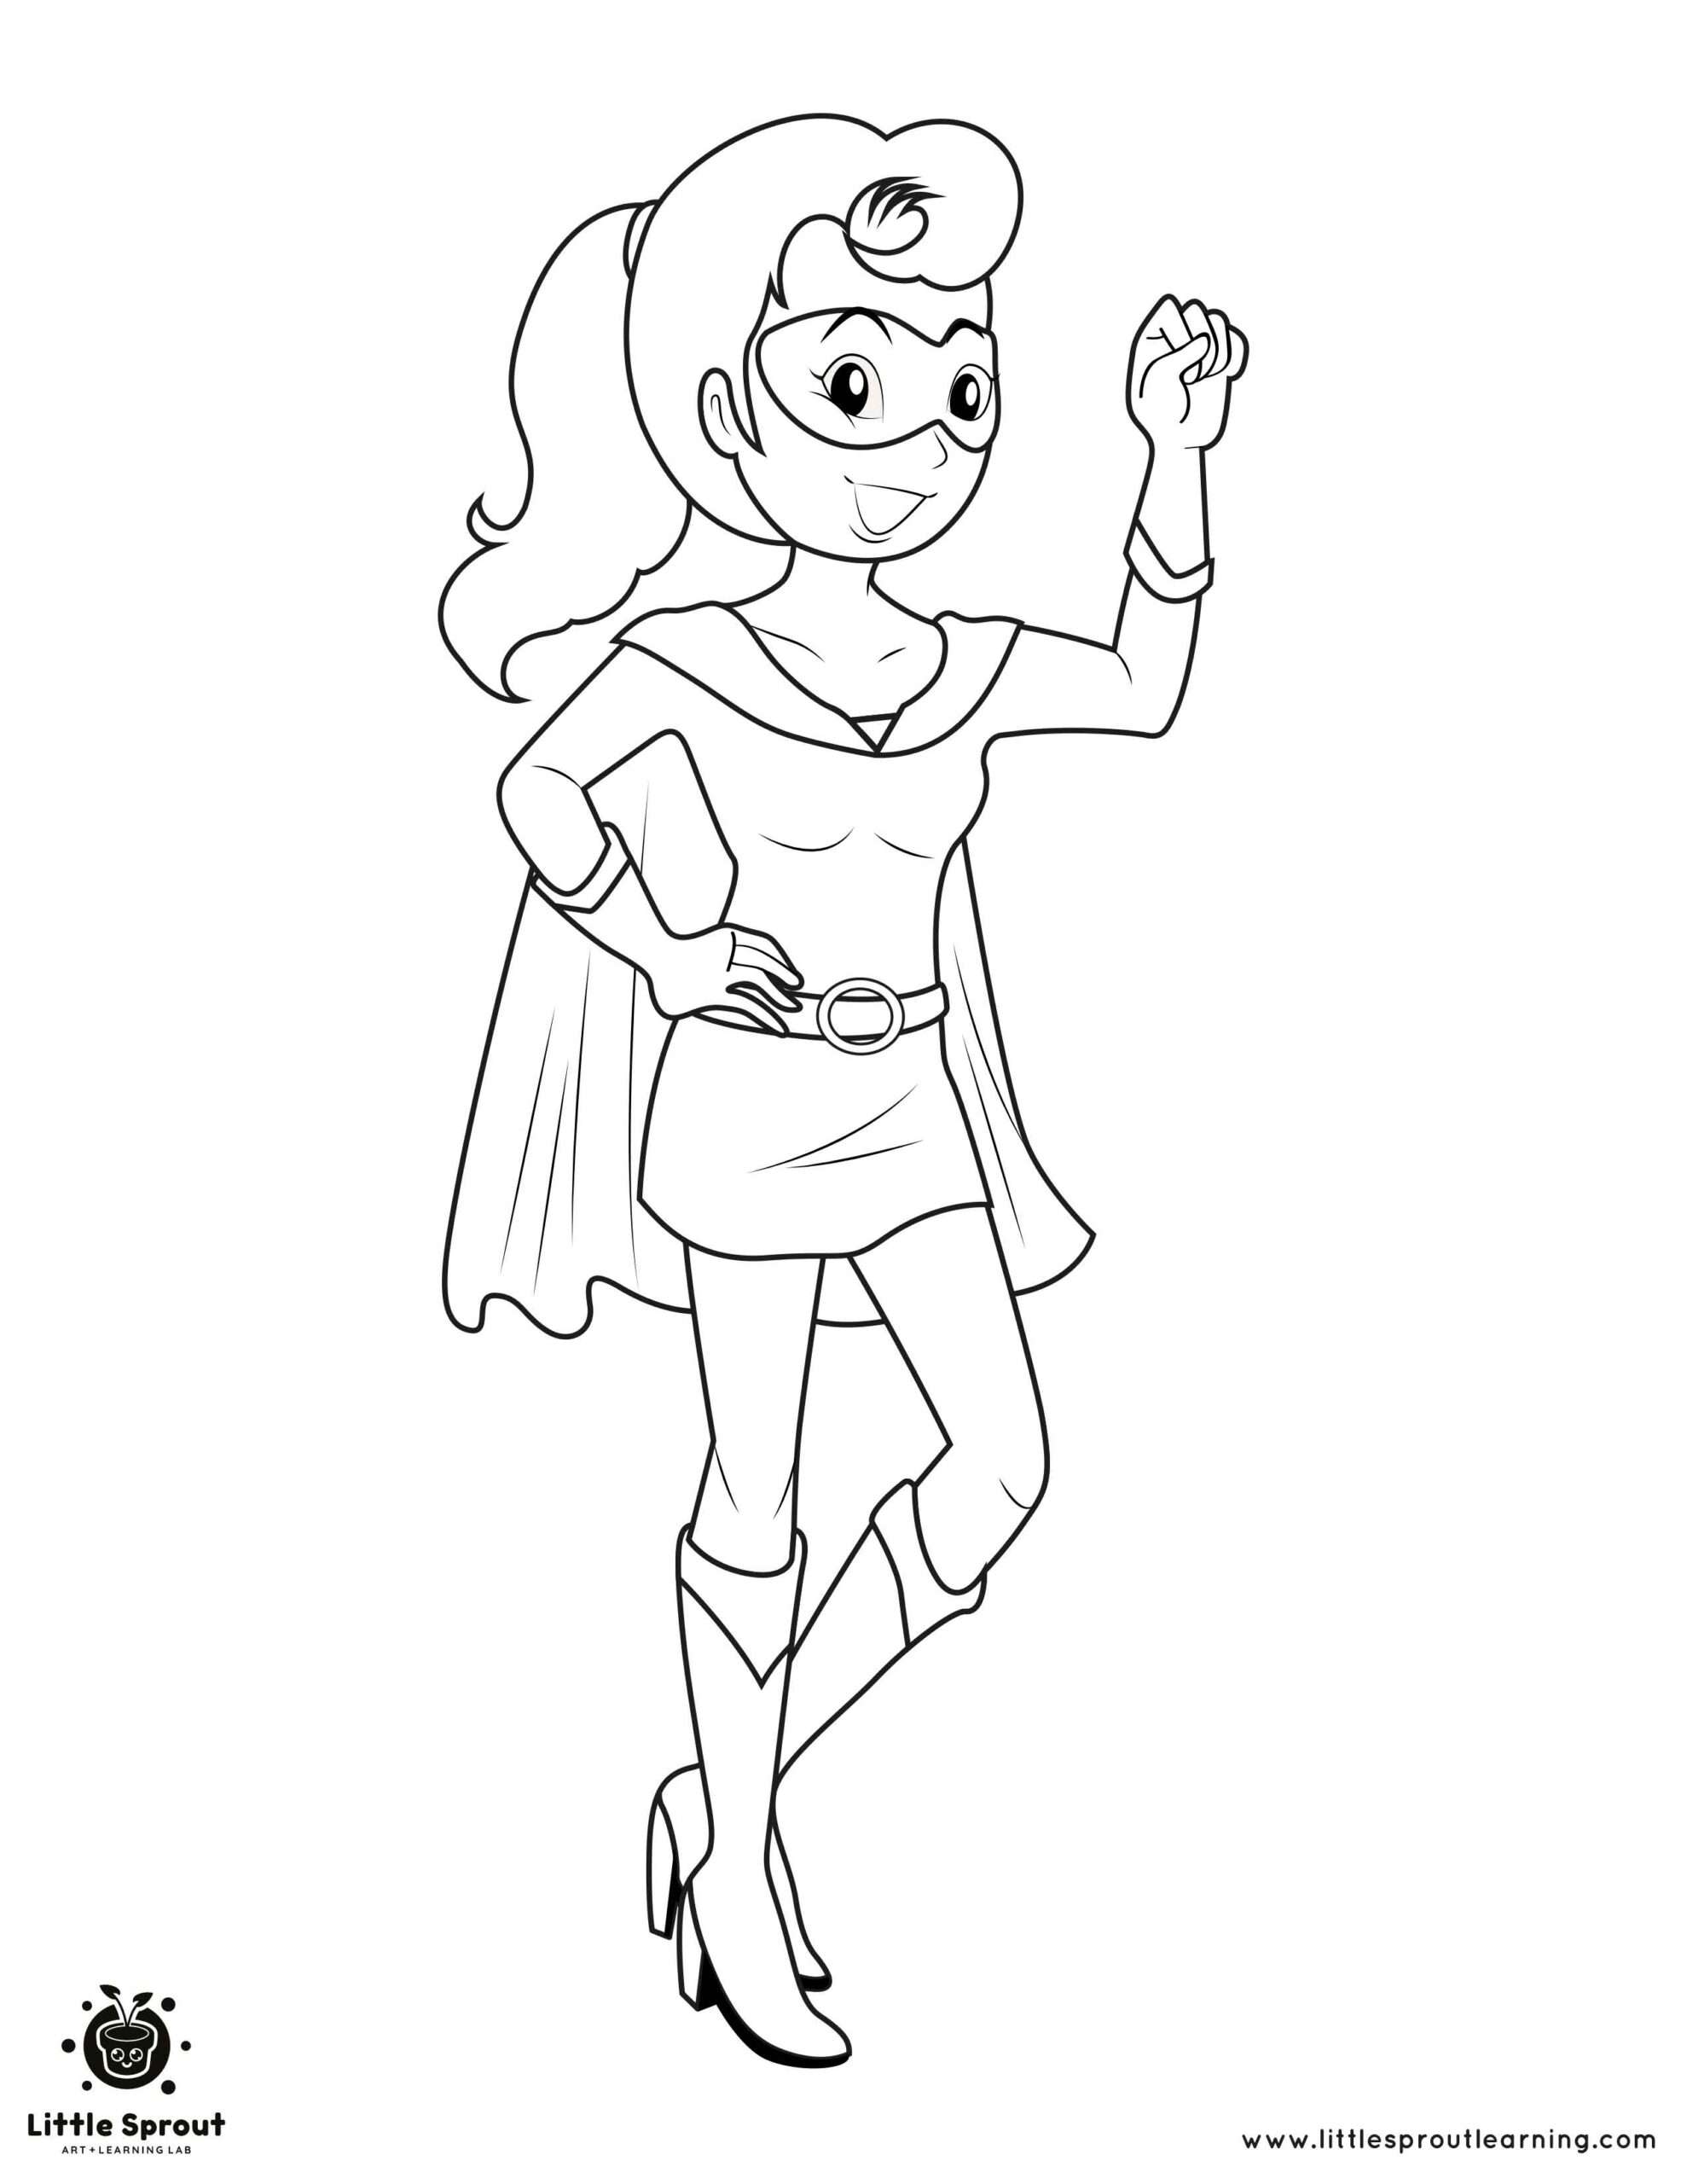 Ready to Help Superhero Coloring Page